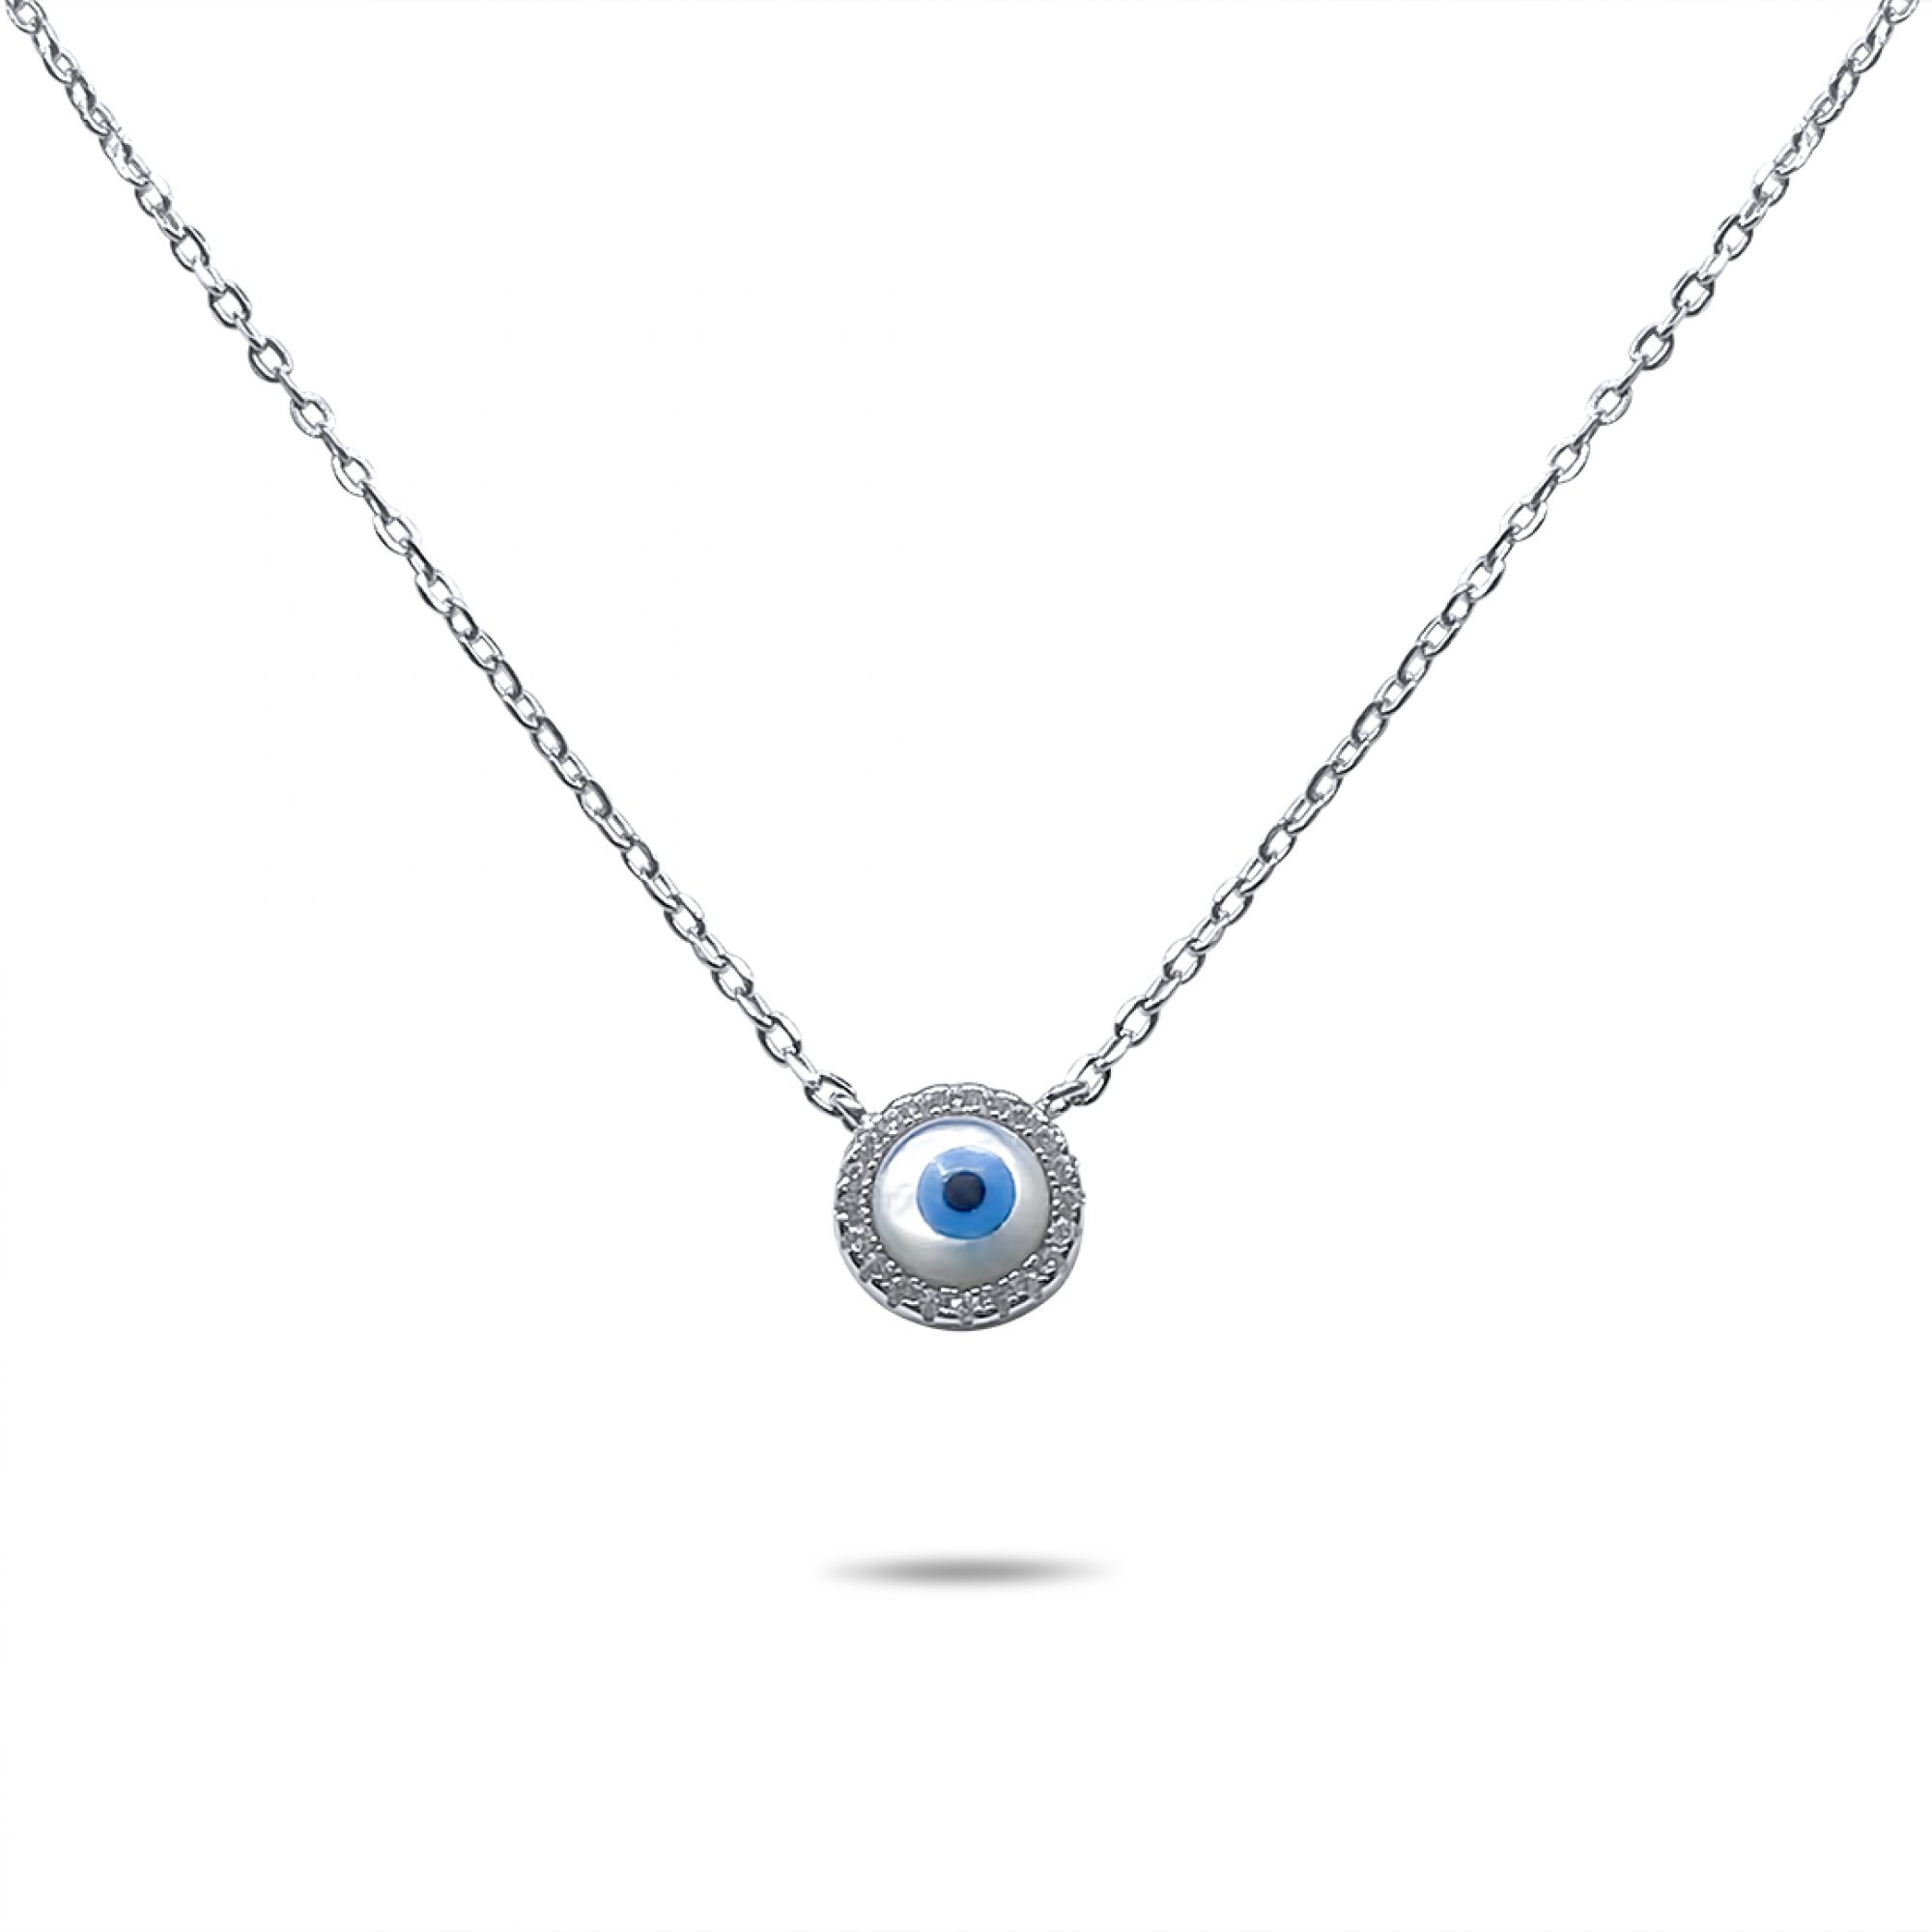 Eye necklace with mother of pearl and zircon stones 